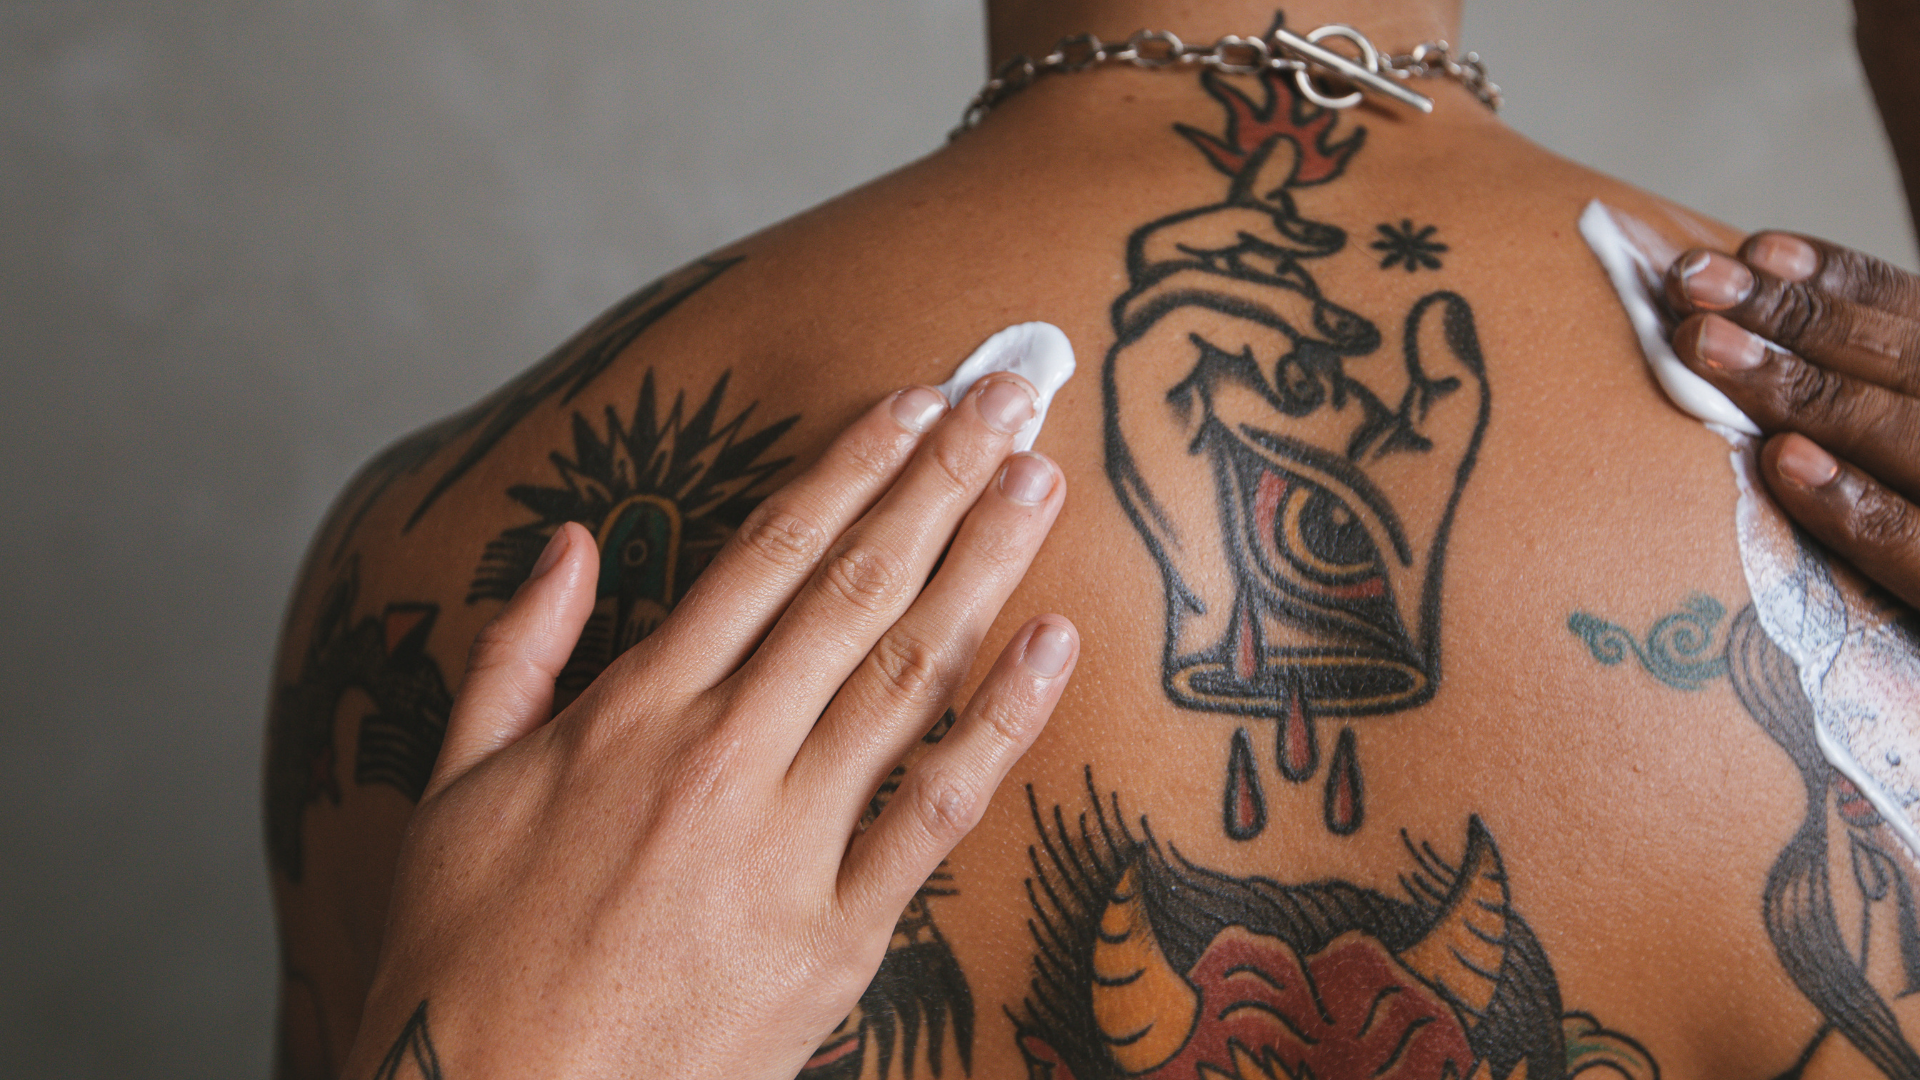 Dry Healing A Tattoo: Pros & Cons